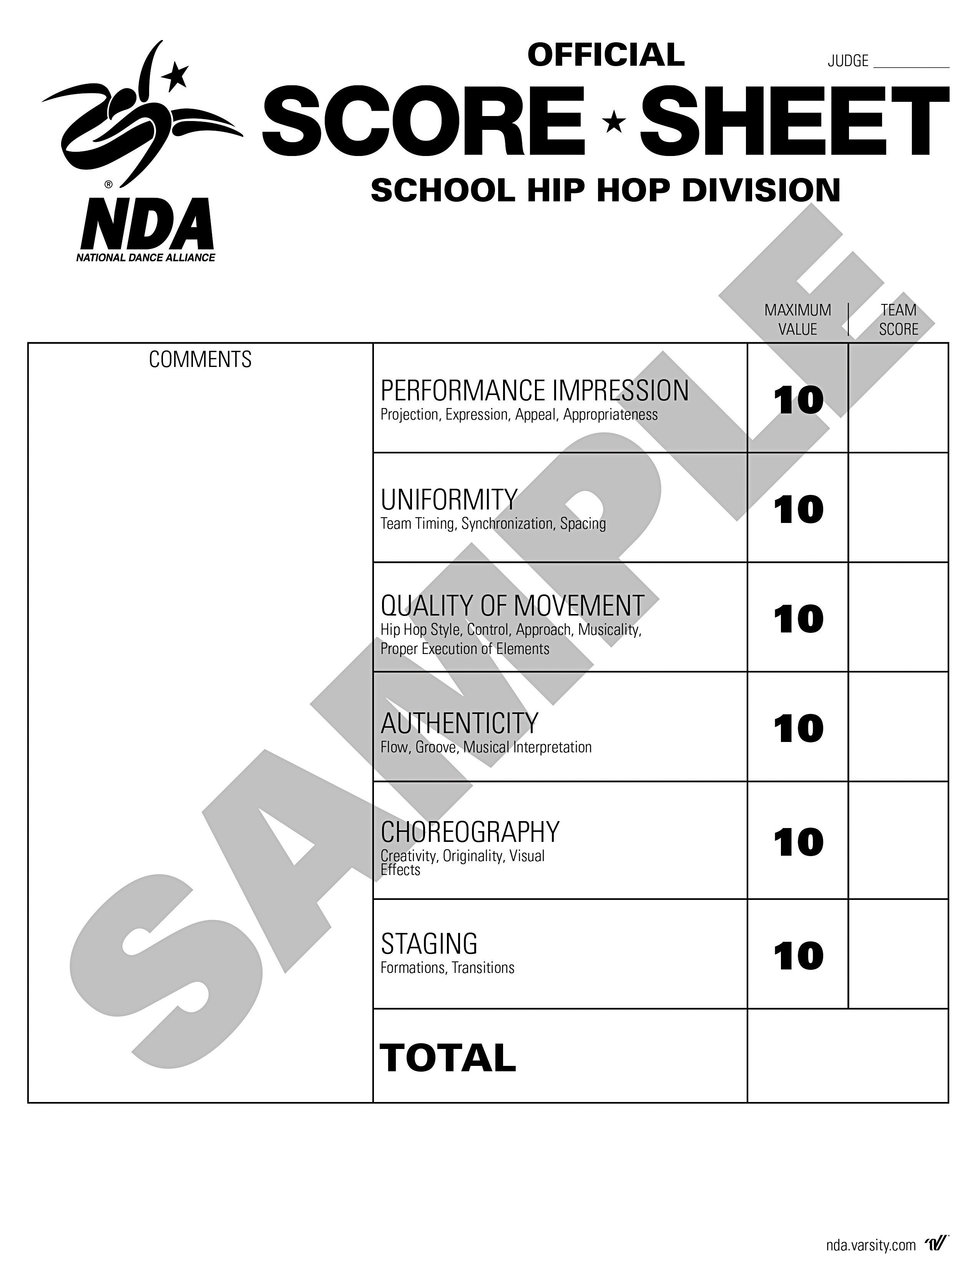 The One Dance Score Sheet Fill And Sign Printable Tem - vrogue.co